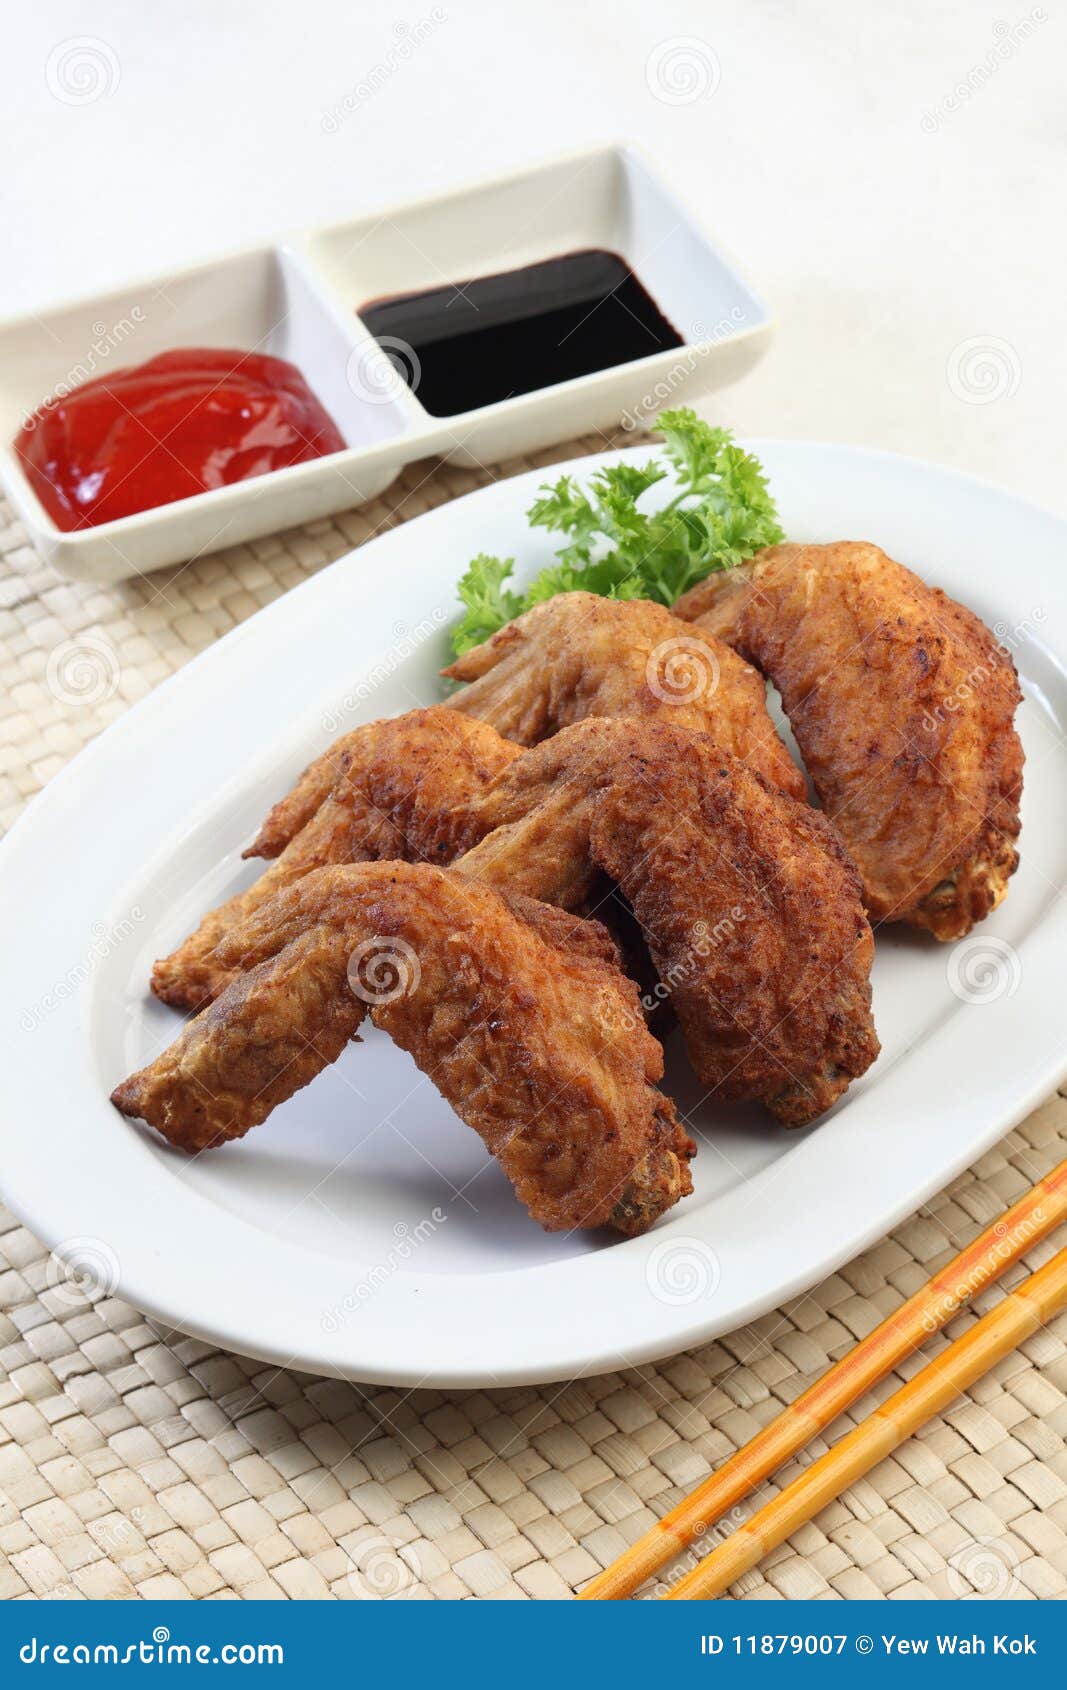 clipart fried chicken wings - photo #34